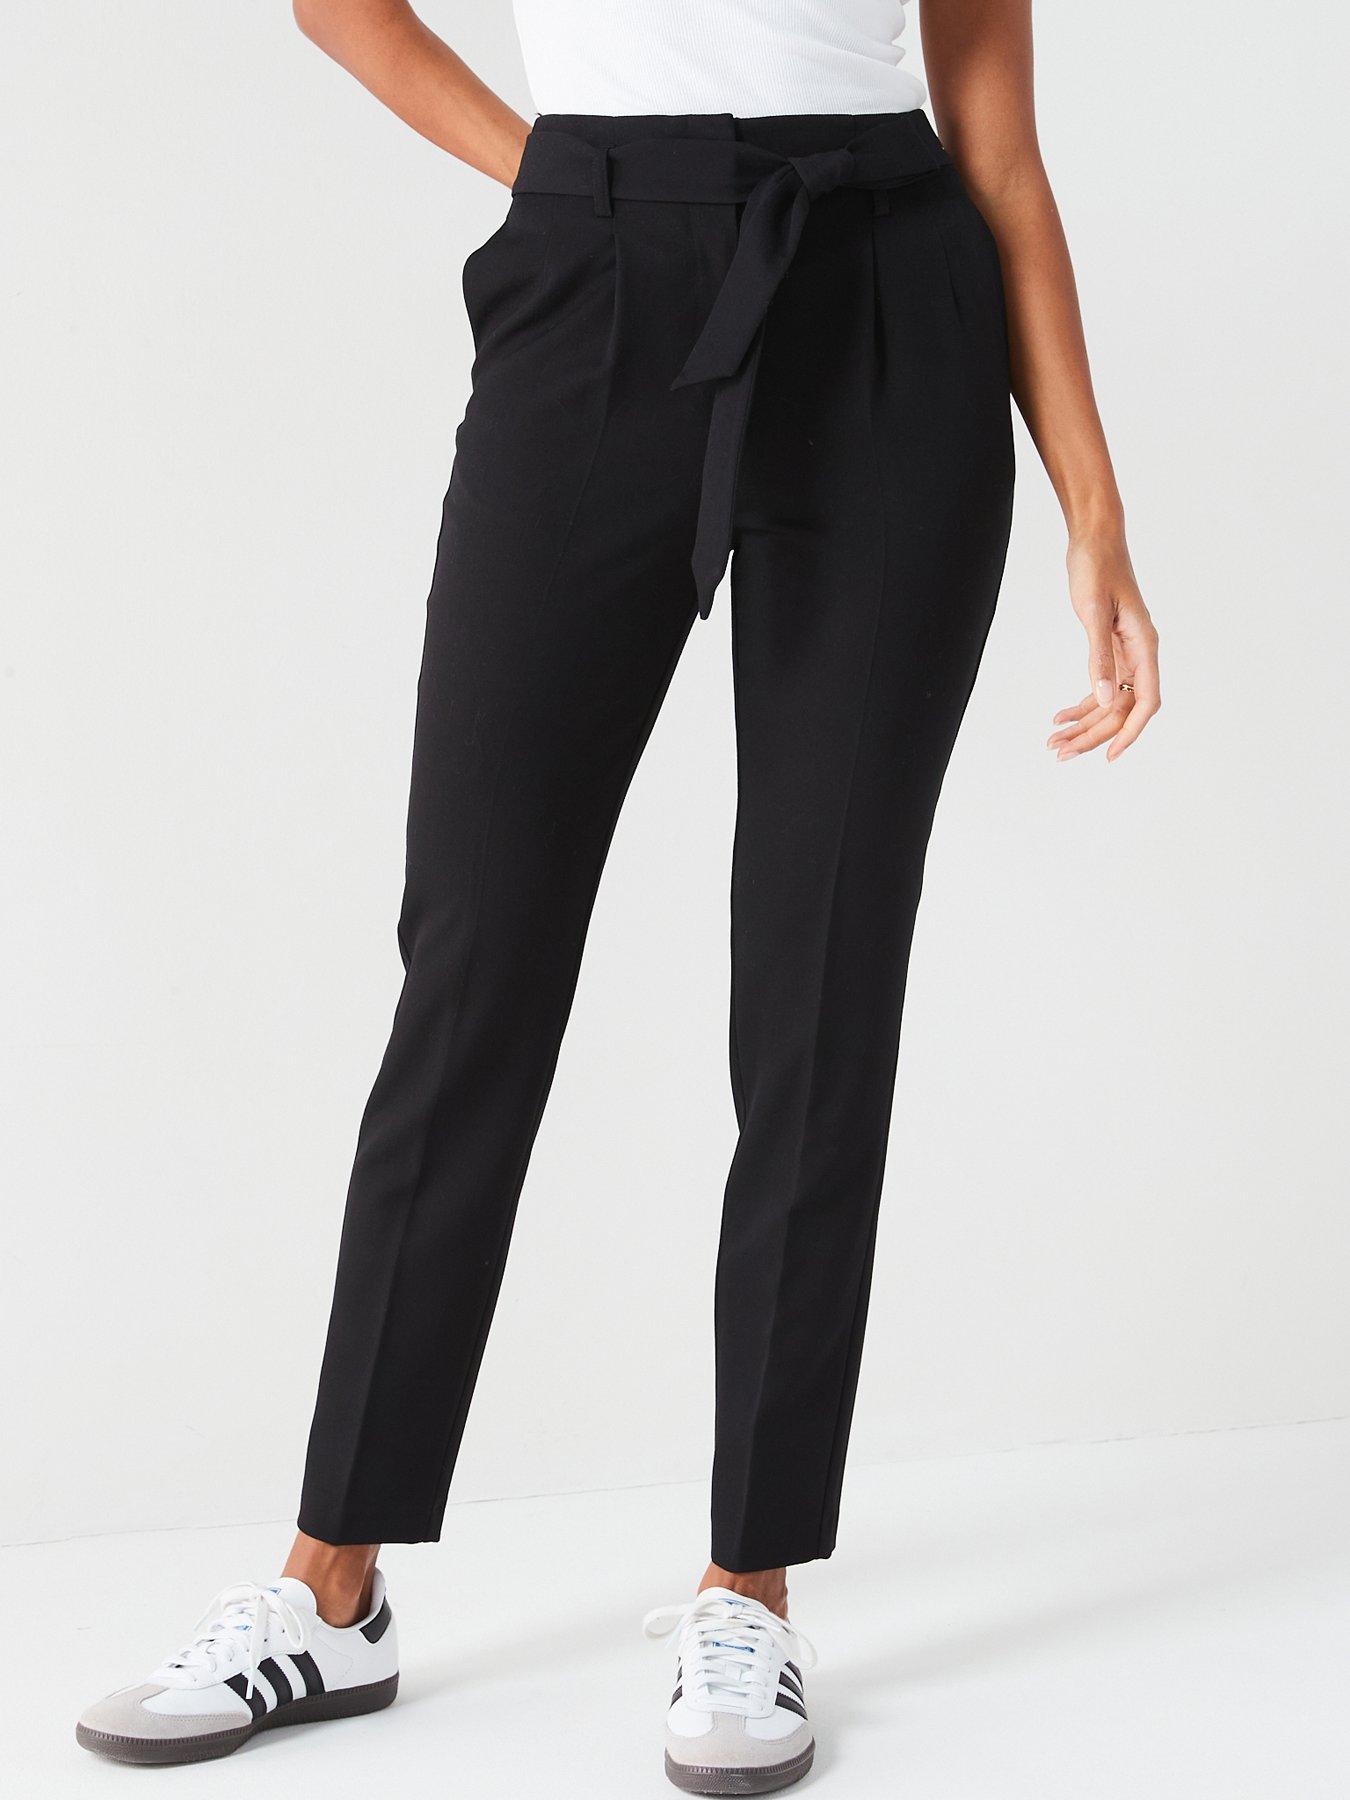 black tapered trousers womens